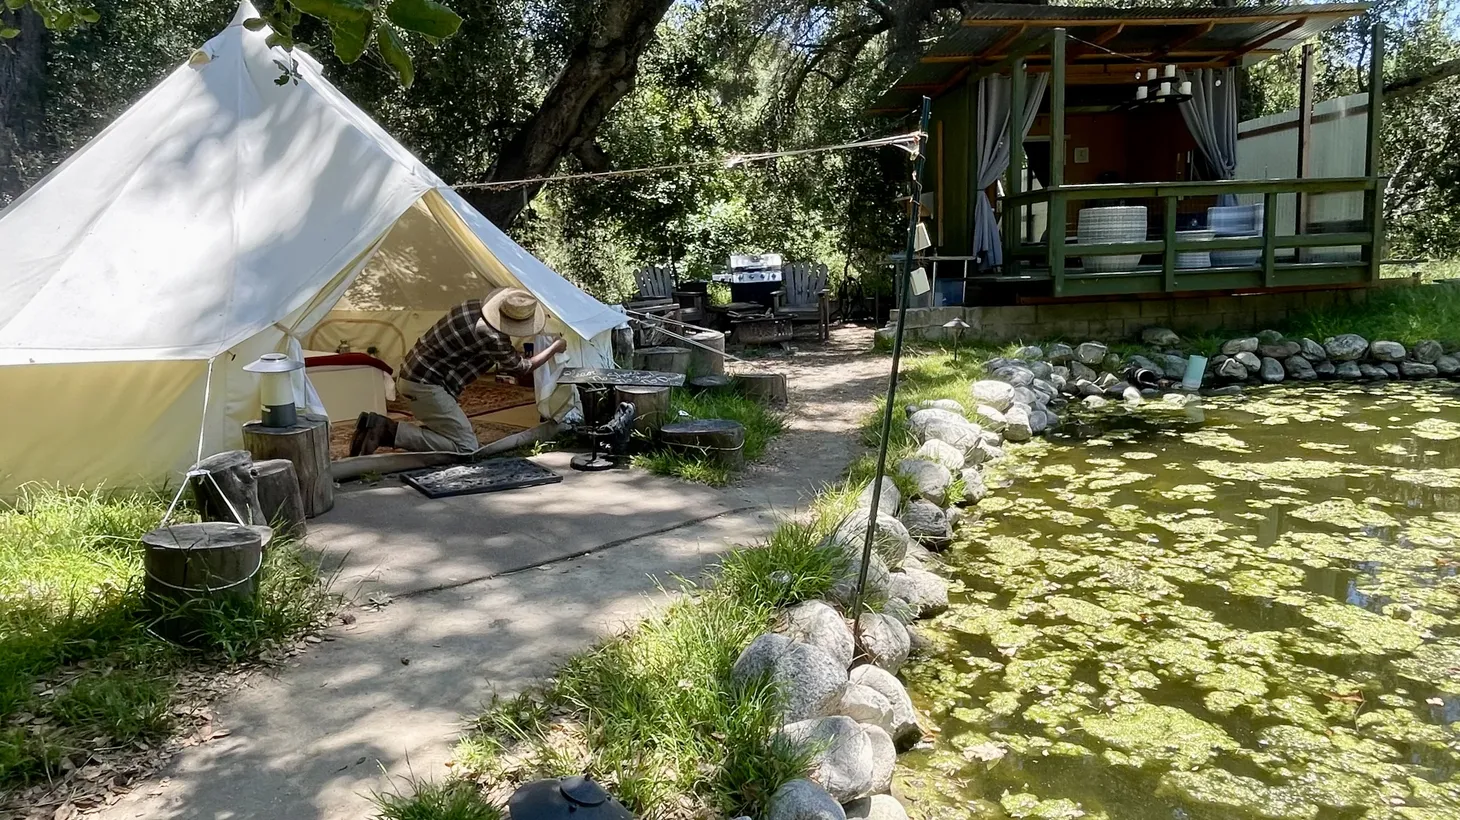 JB Wagoner prepares the glamping site called Temecula Bullfrog Pond, which he rents to travelers on his 20-acre ranch outside of Temecula.